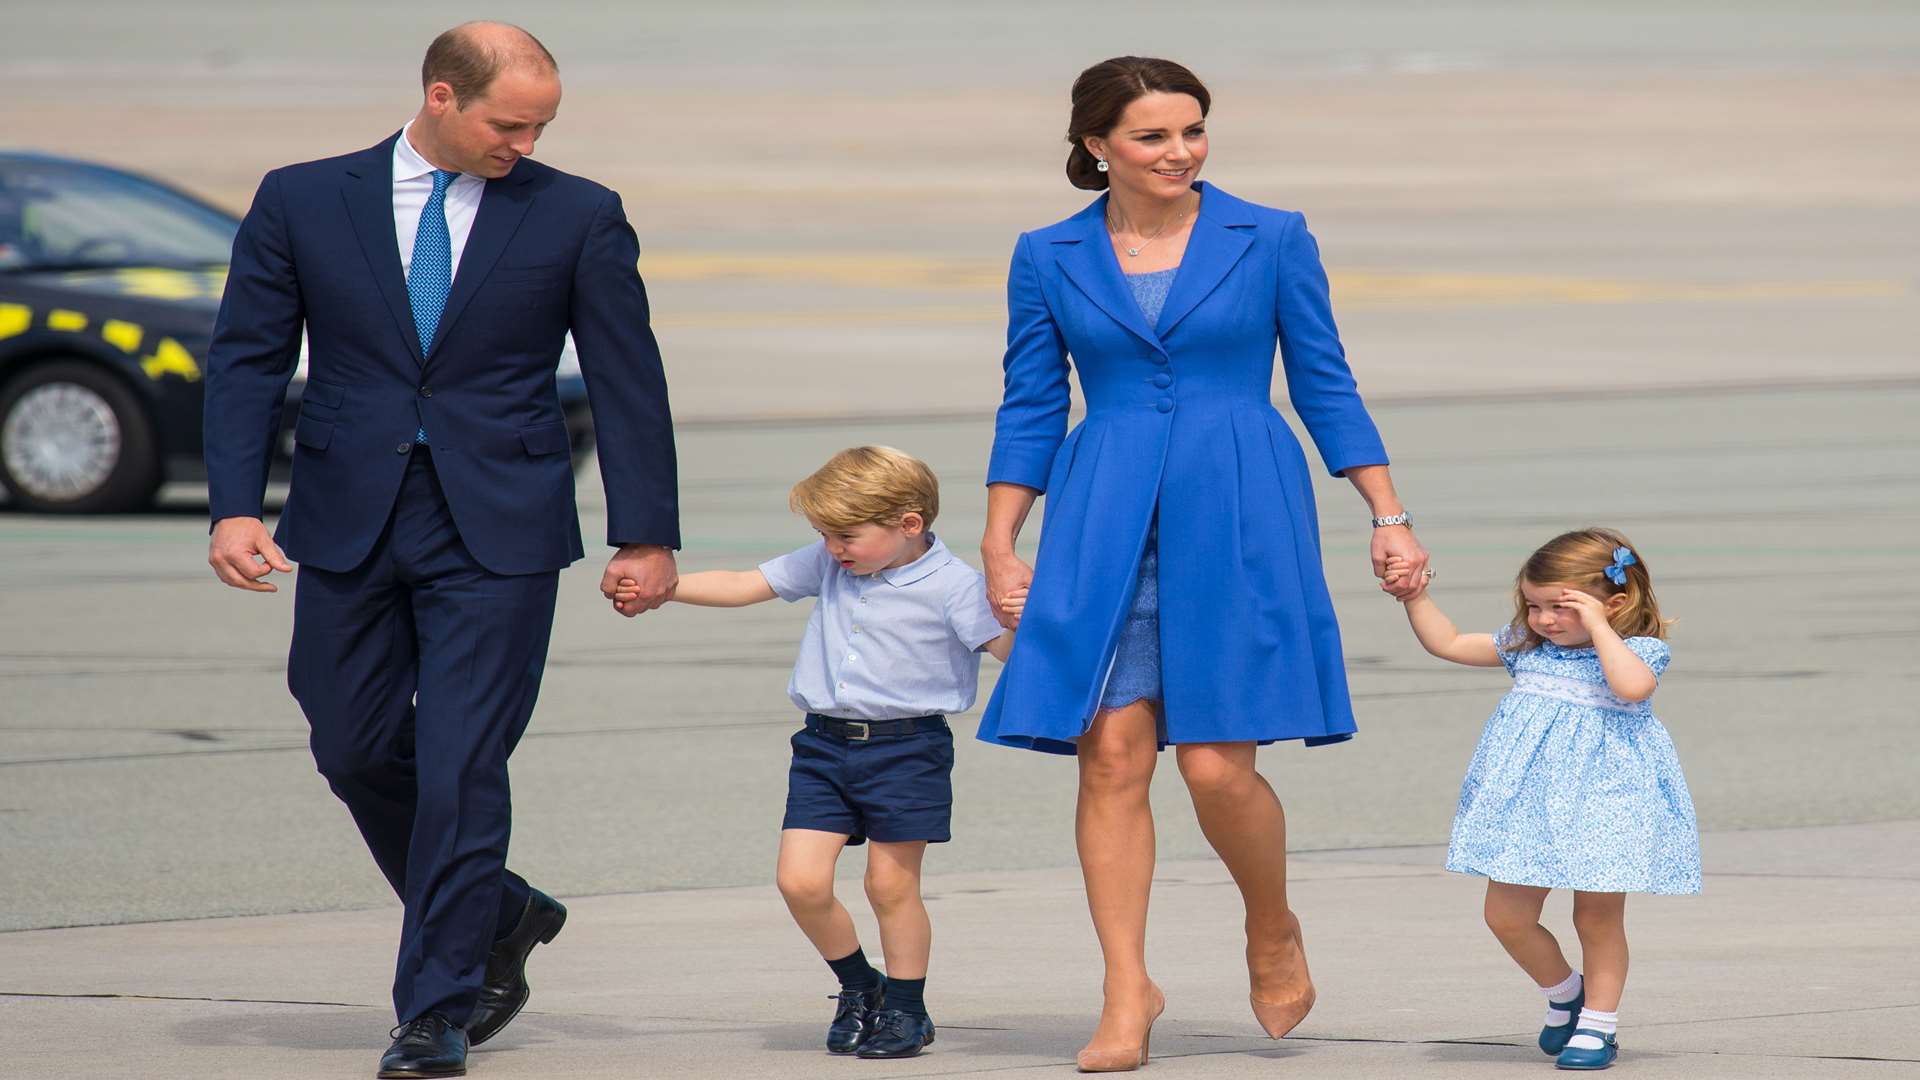 The royal family during their recent tour of Poland and Germany